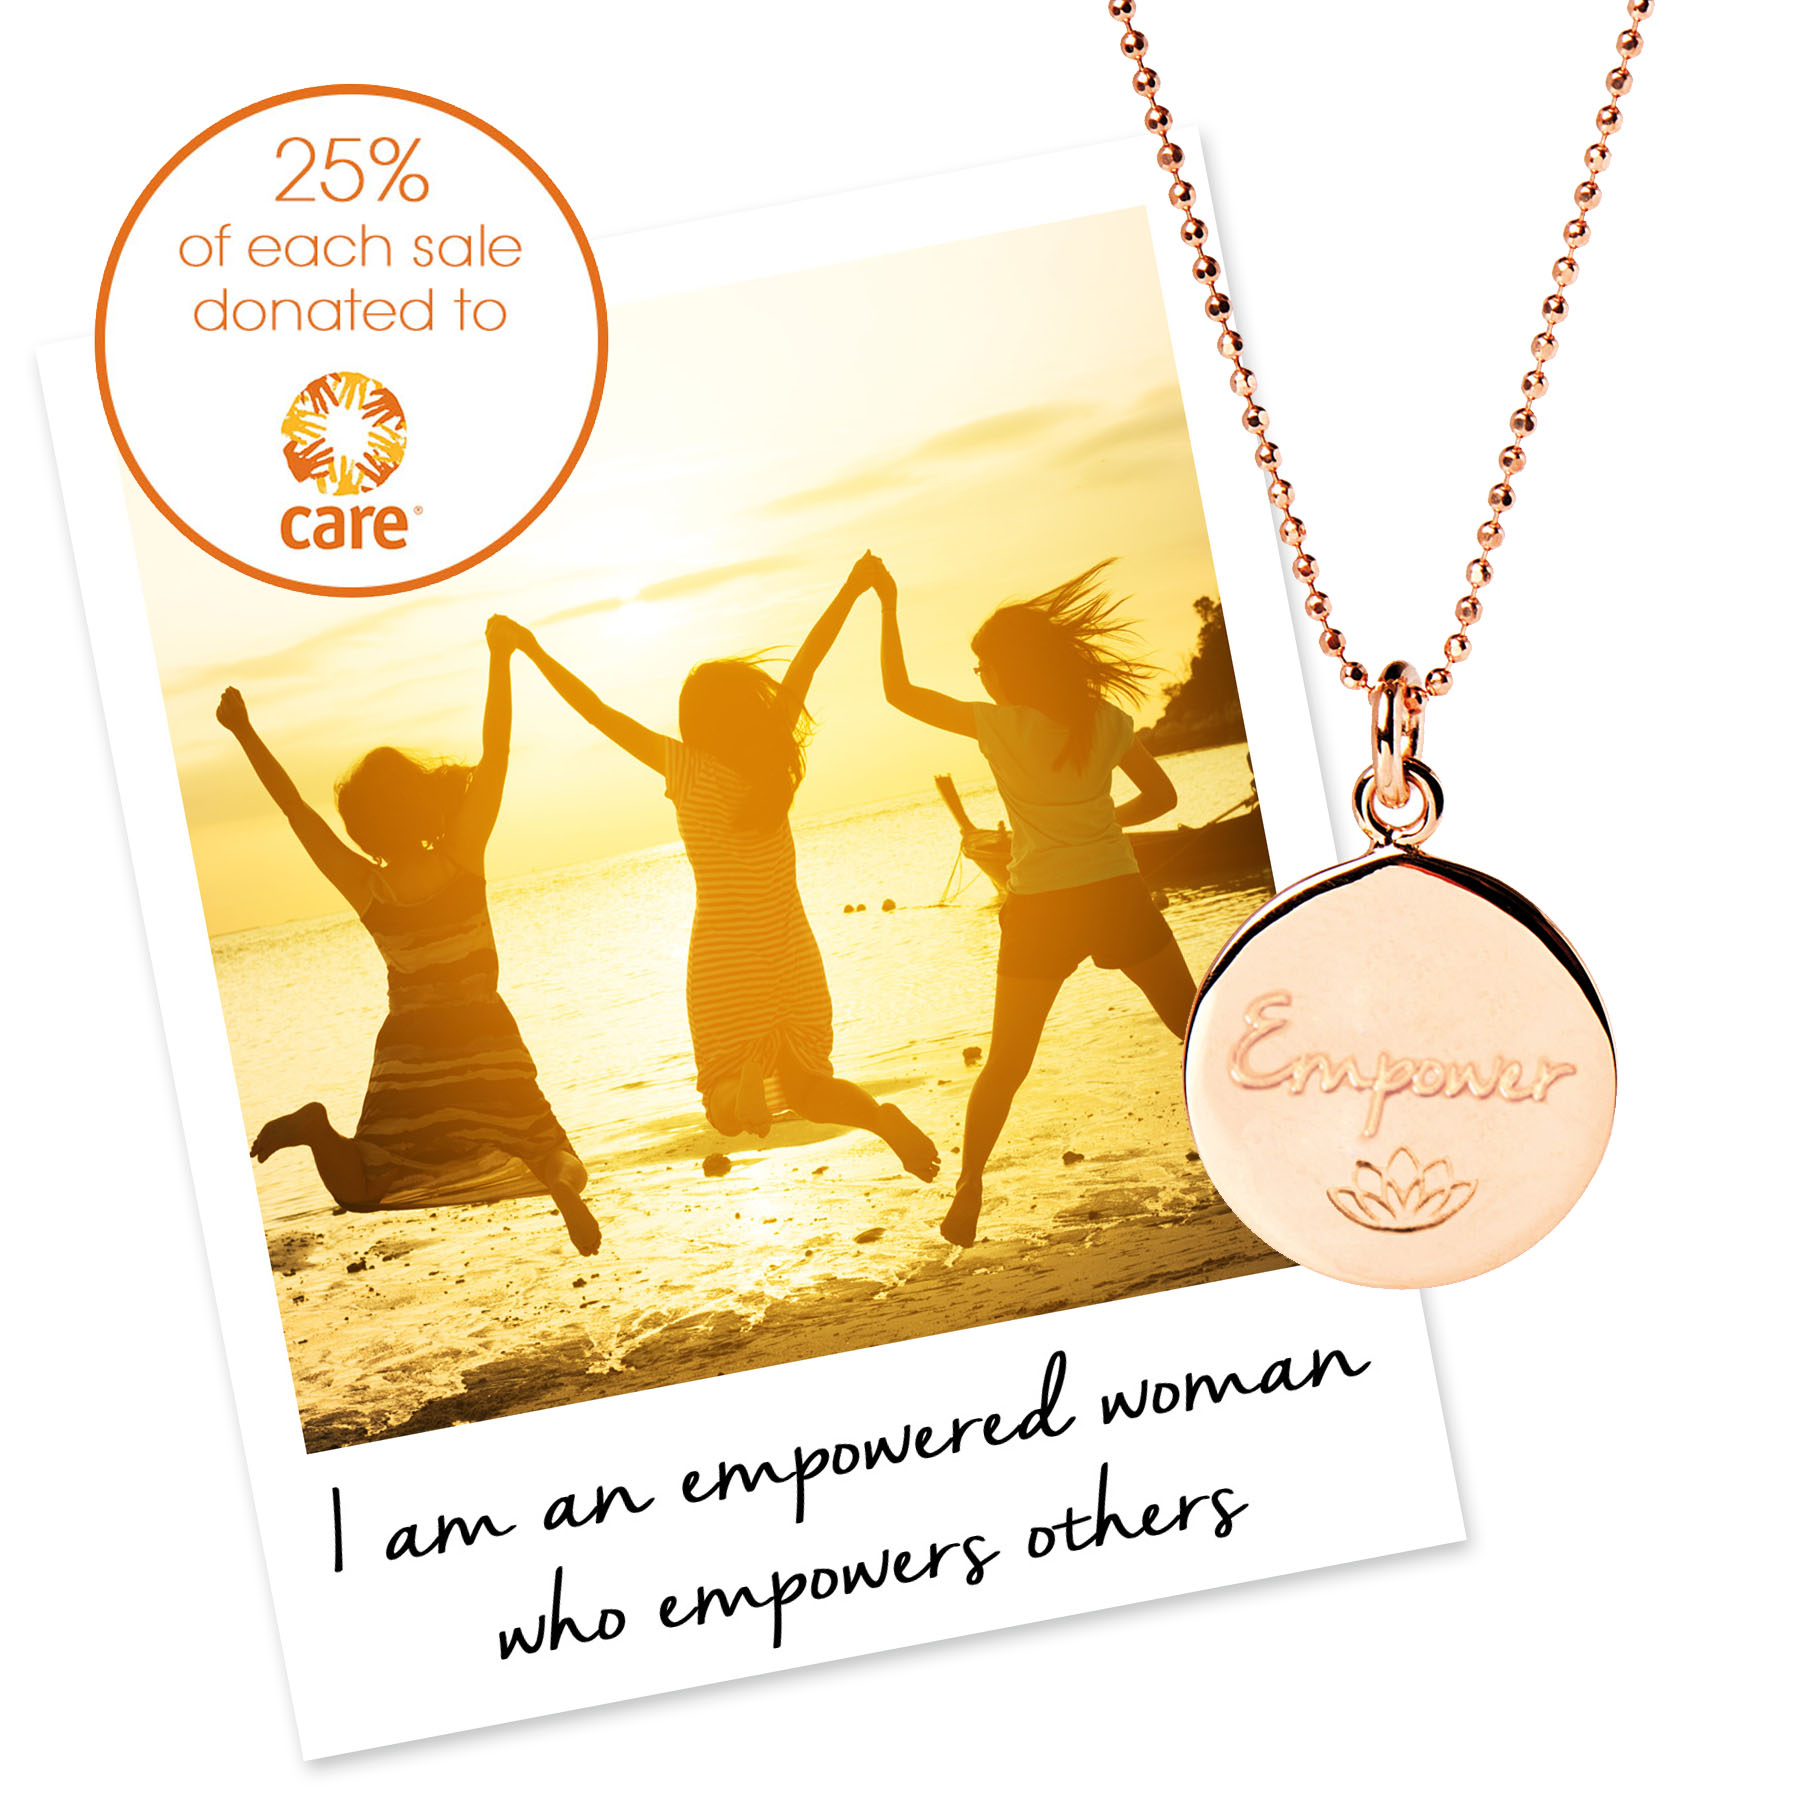 charity necklace for care international